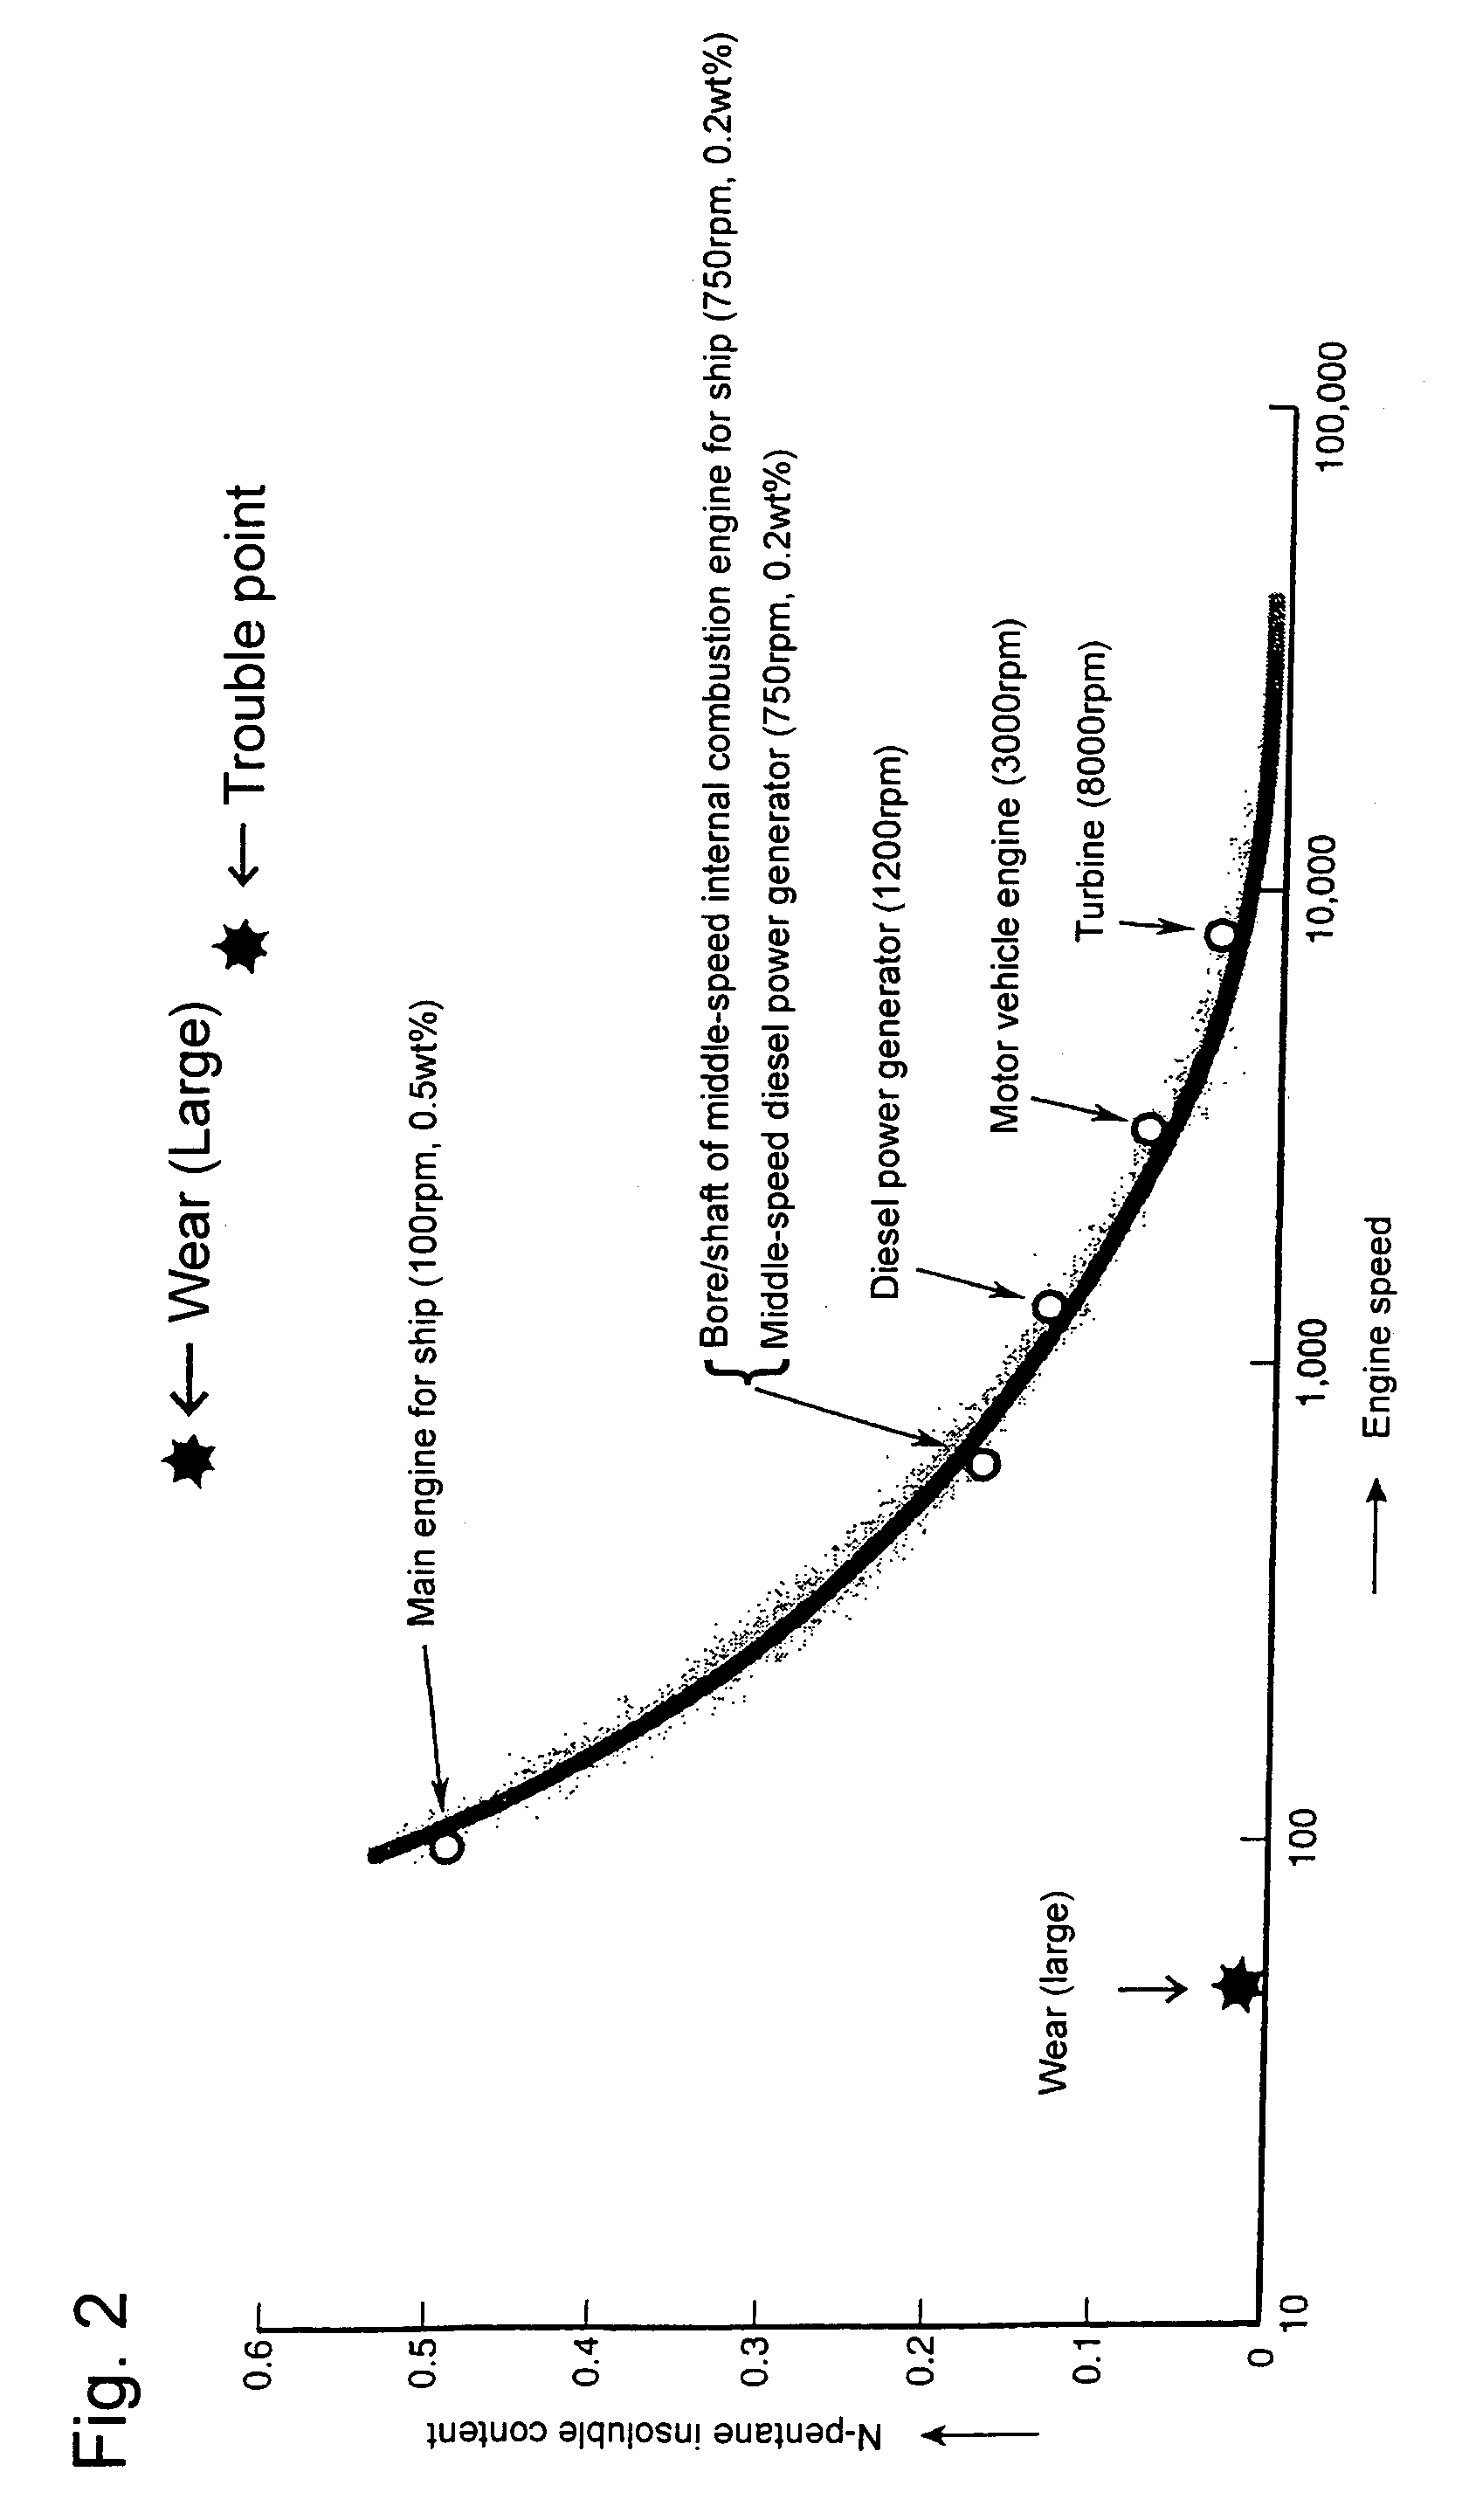 Suppressing method of wear in friction system between two objects